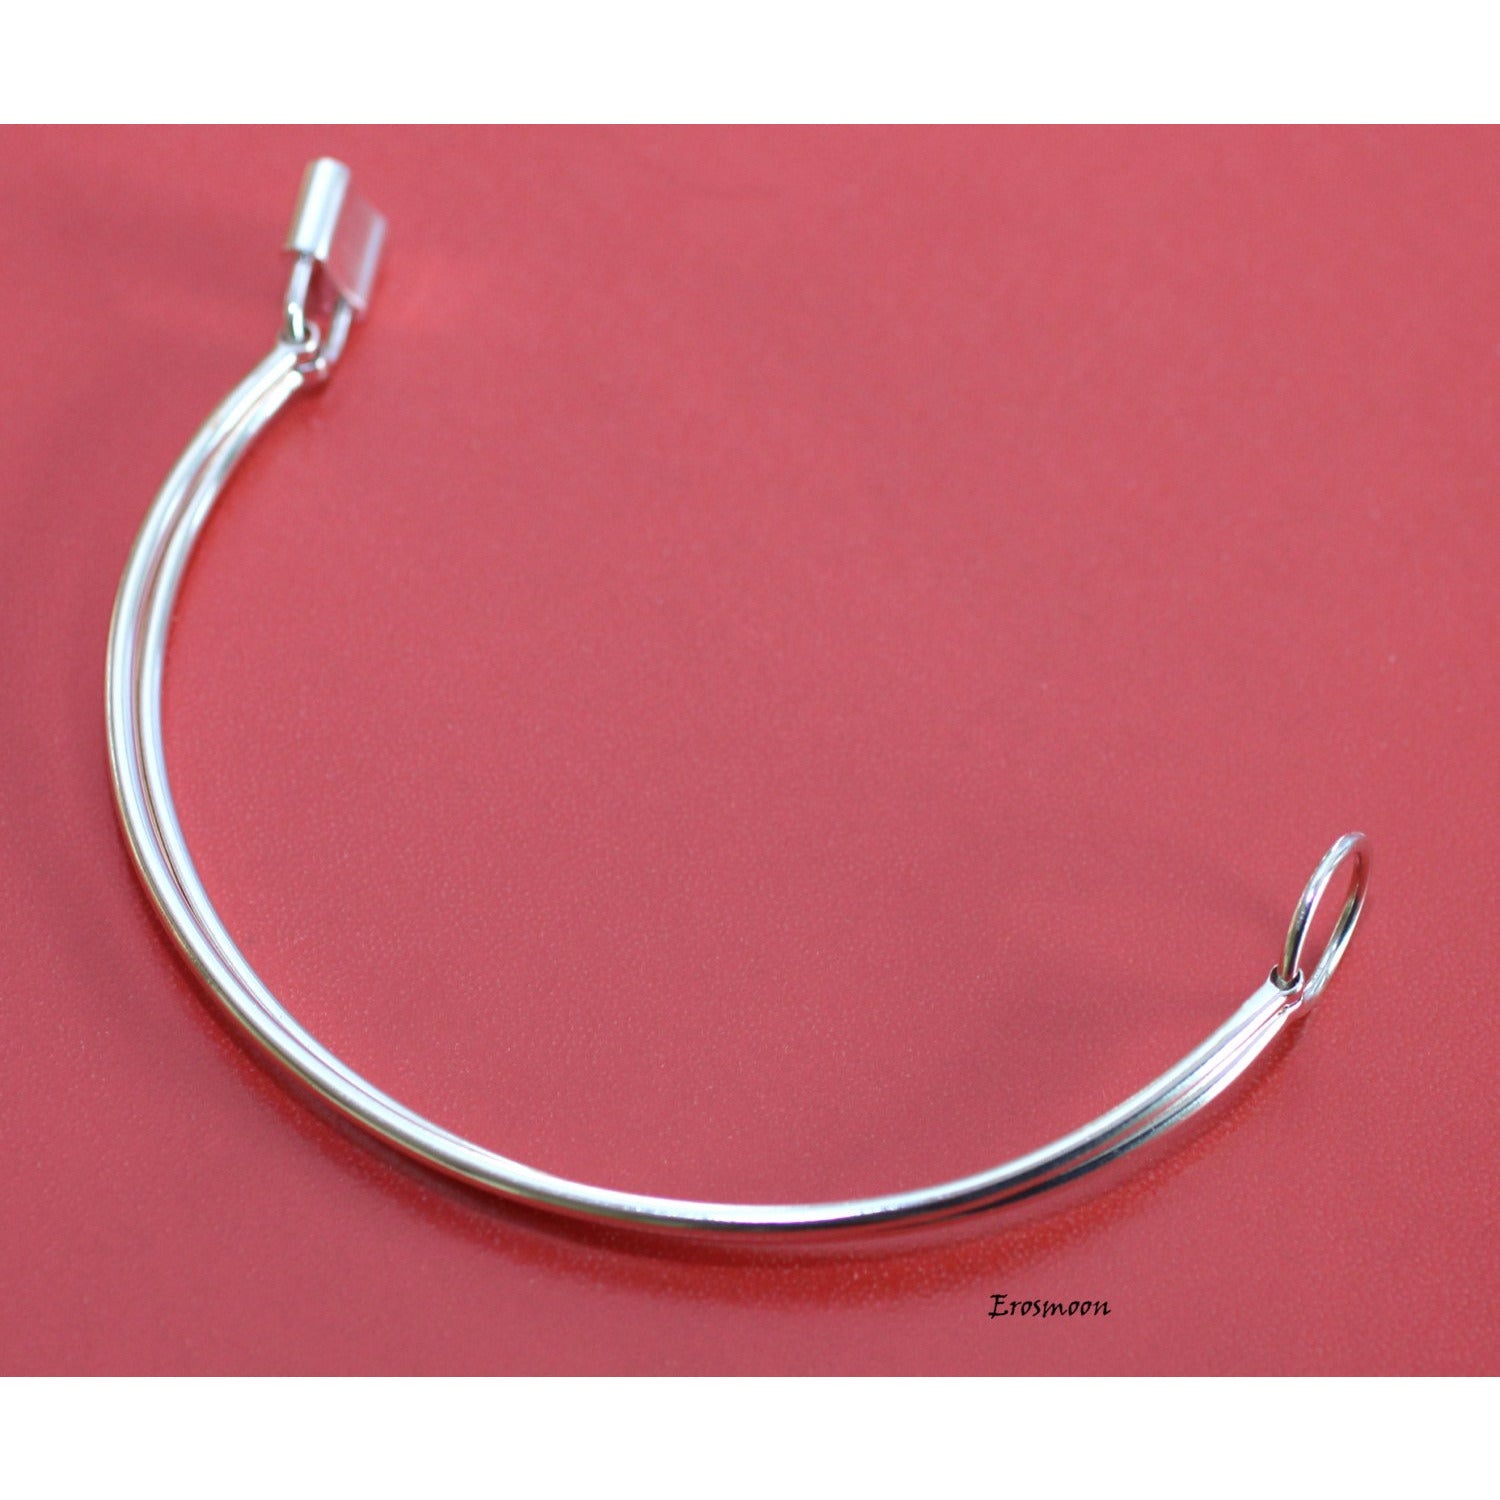 Discreet Hinged,Day Collar, 3mm sterling silver (8g), Padlock clasp, hinged by front O ring, Handmade BDSM Collar